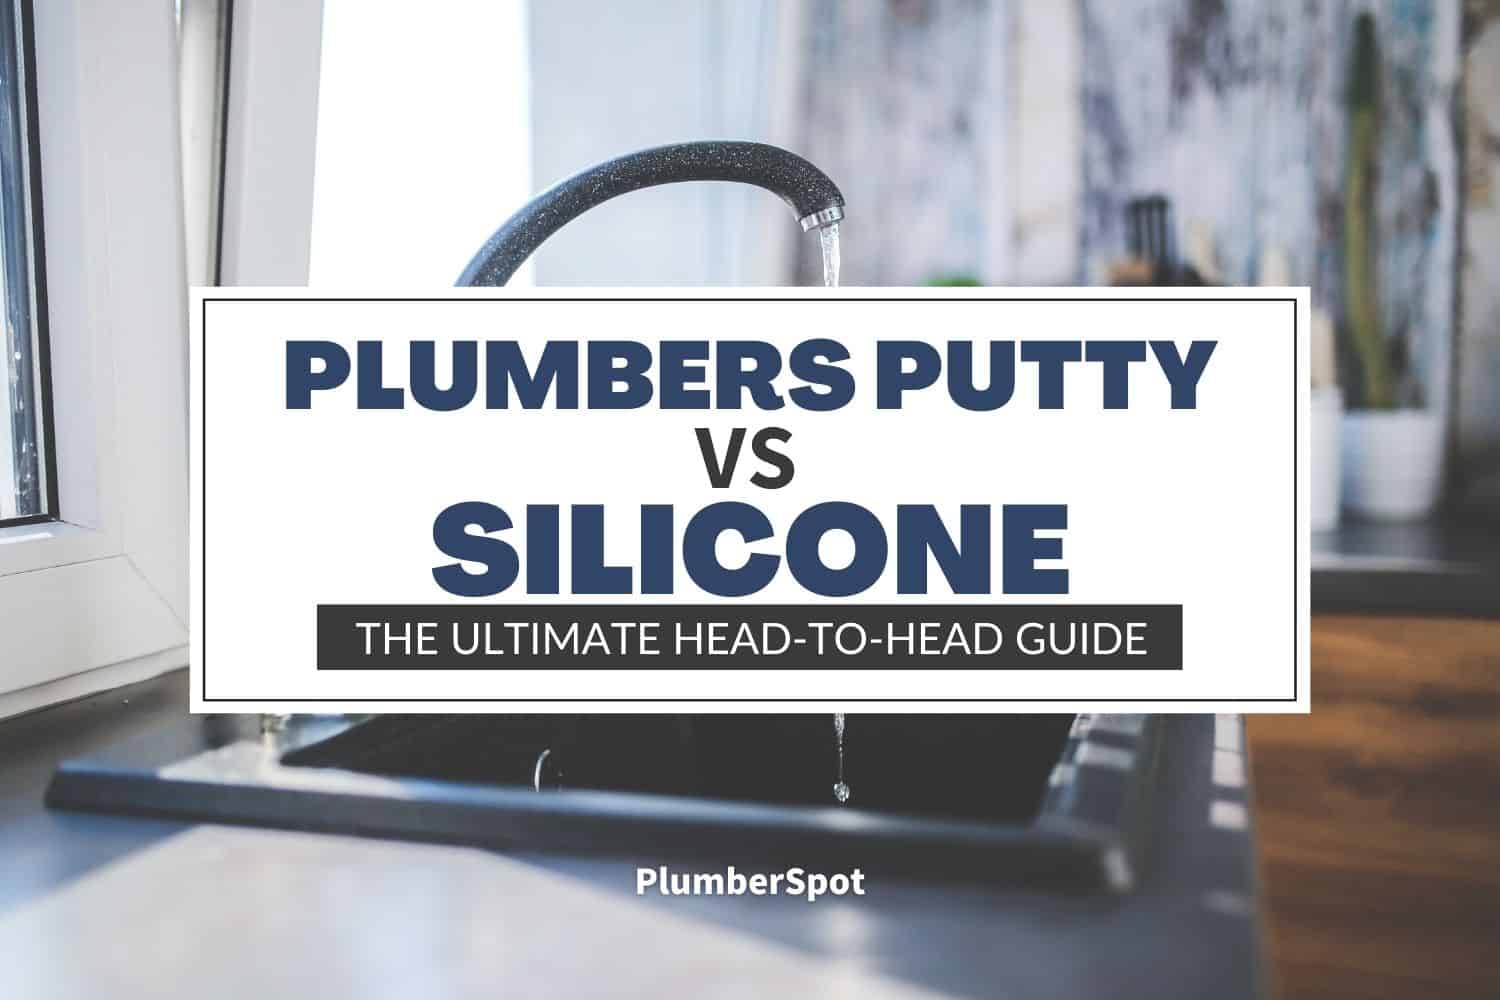 Plumbers Putty vs Silicone